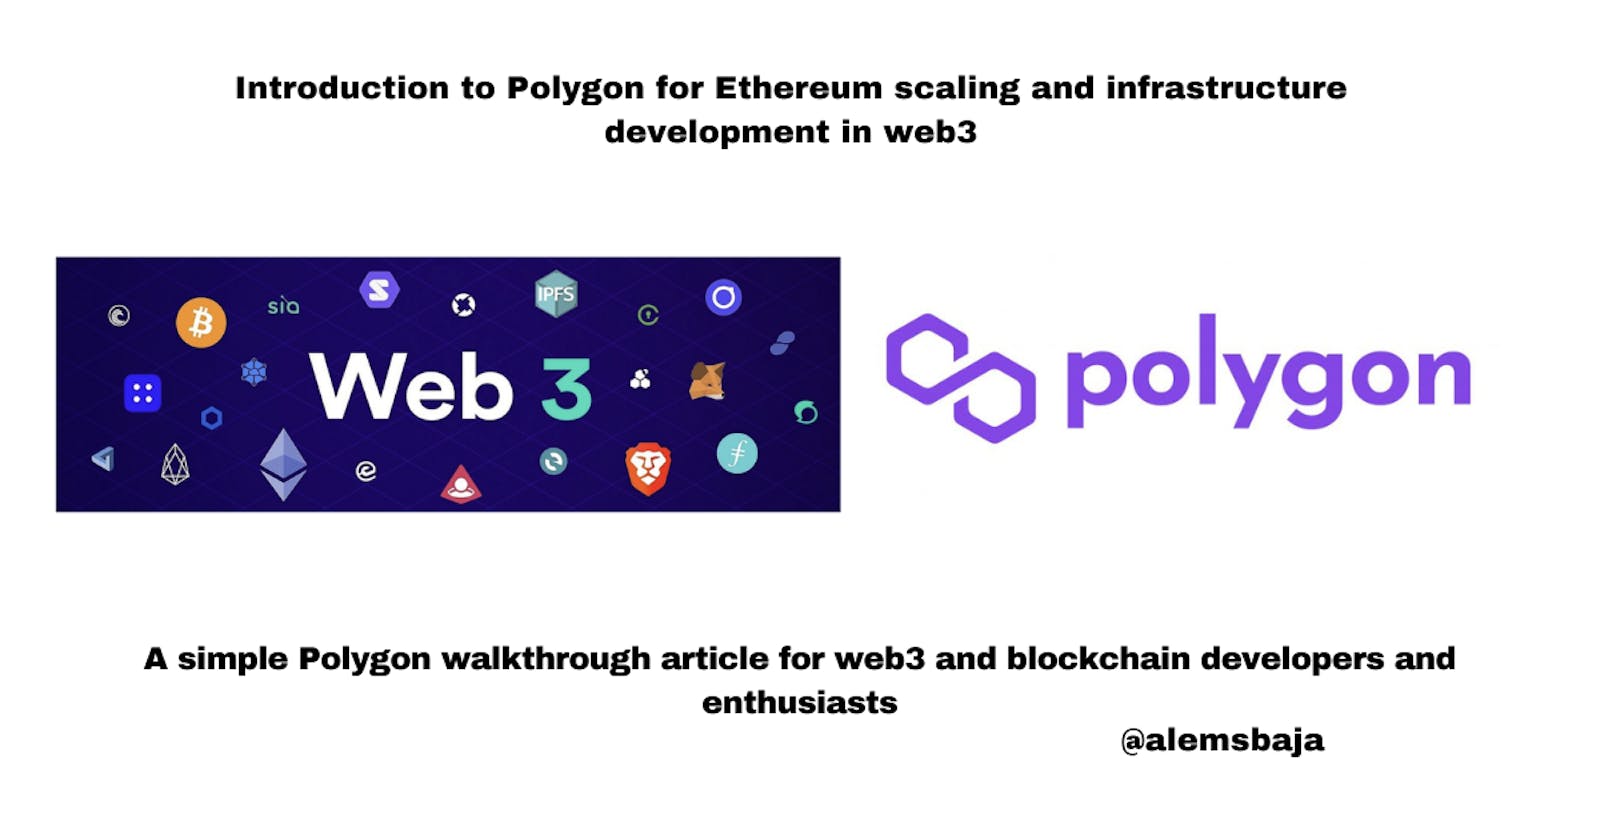 Introduction to Polygon for Ethereum scaling and infrastructure development in web3